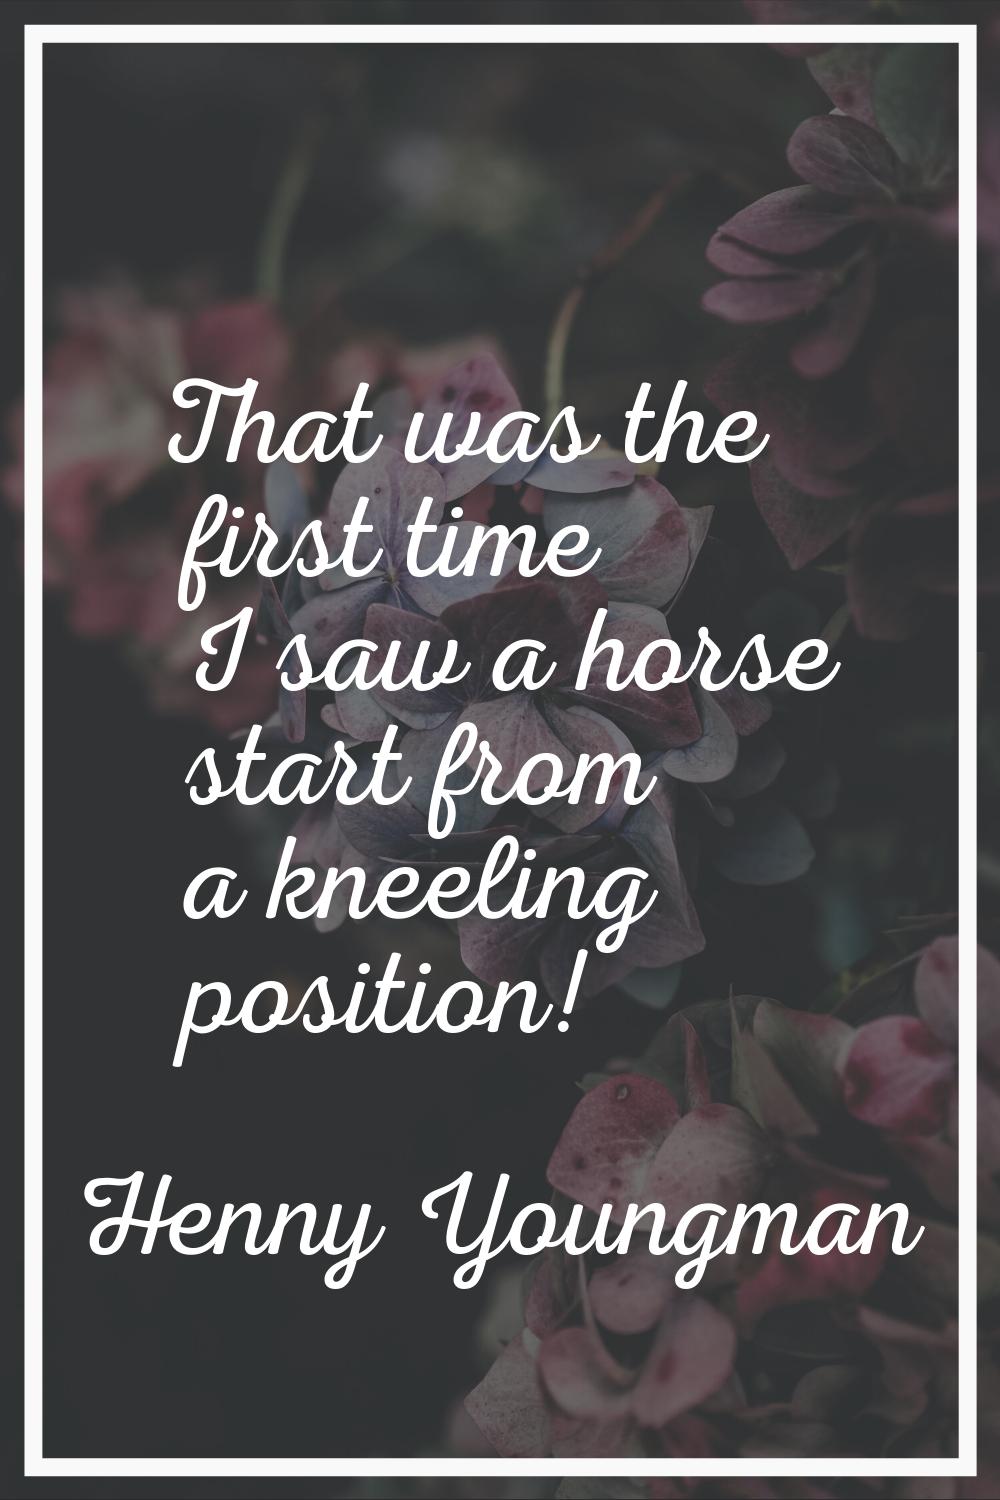 That was the first time I saw a horse start from a kneeling position!